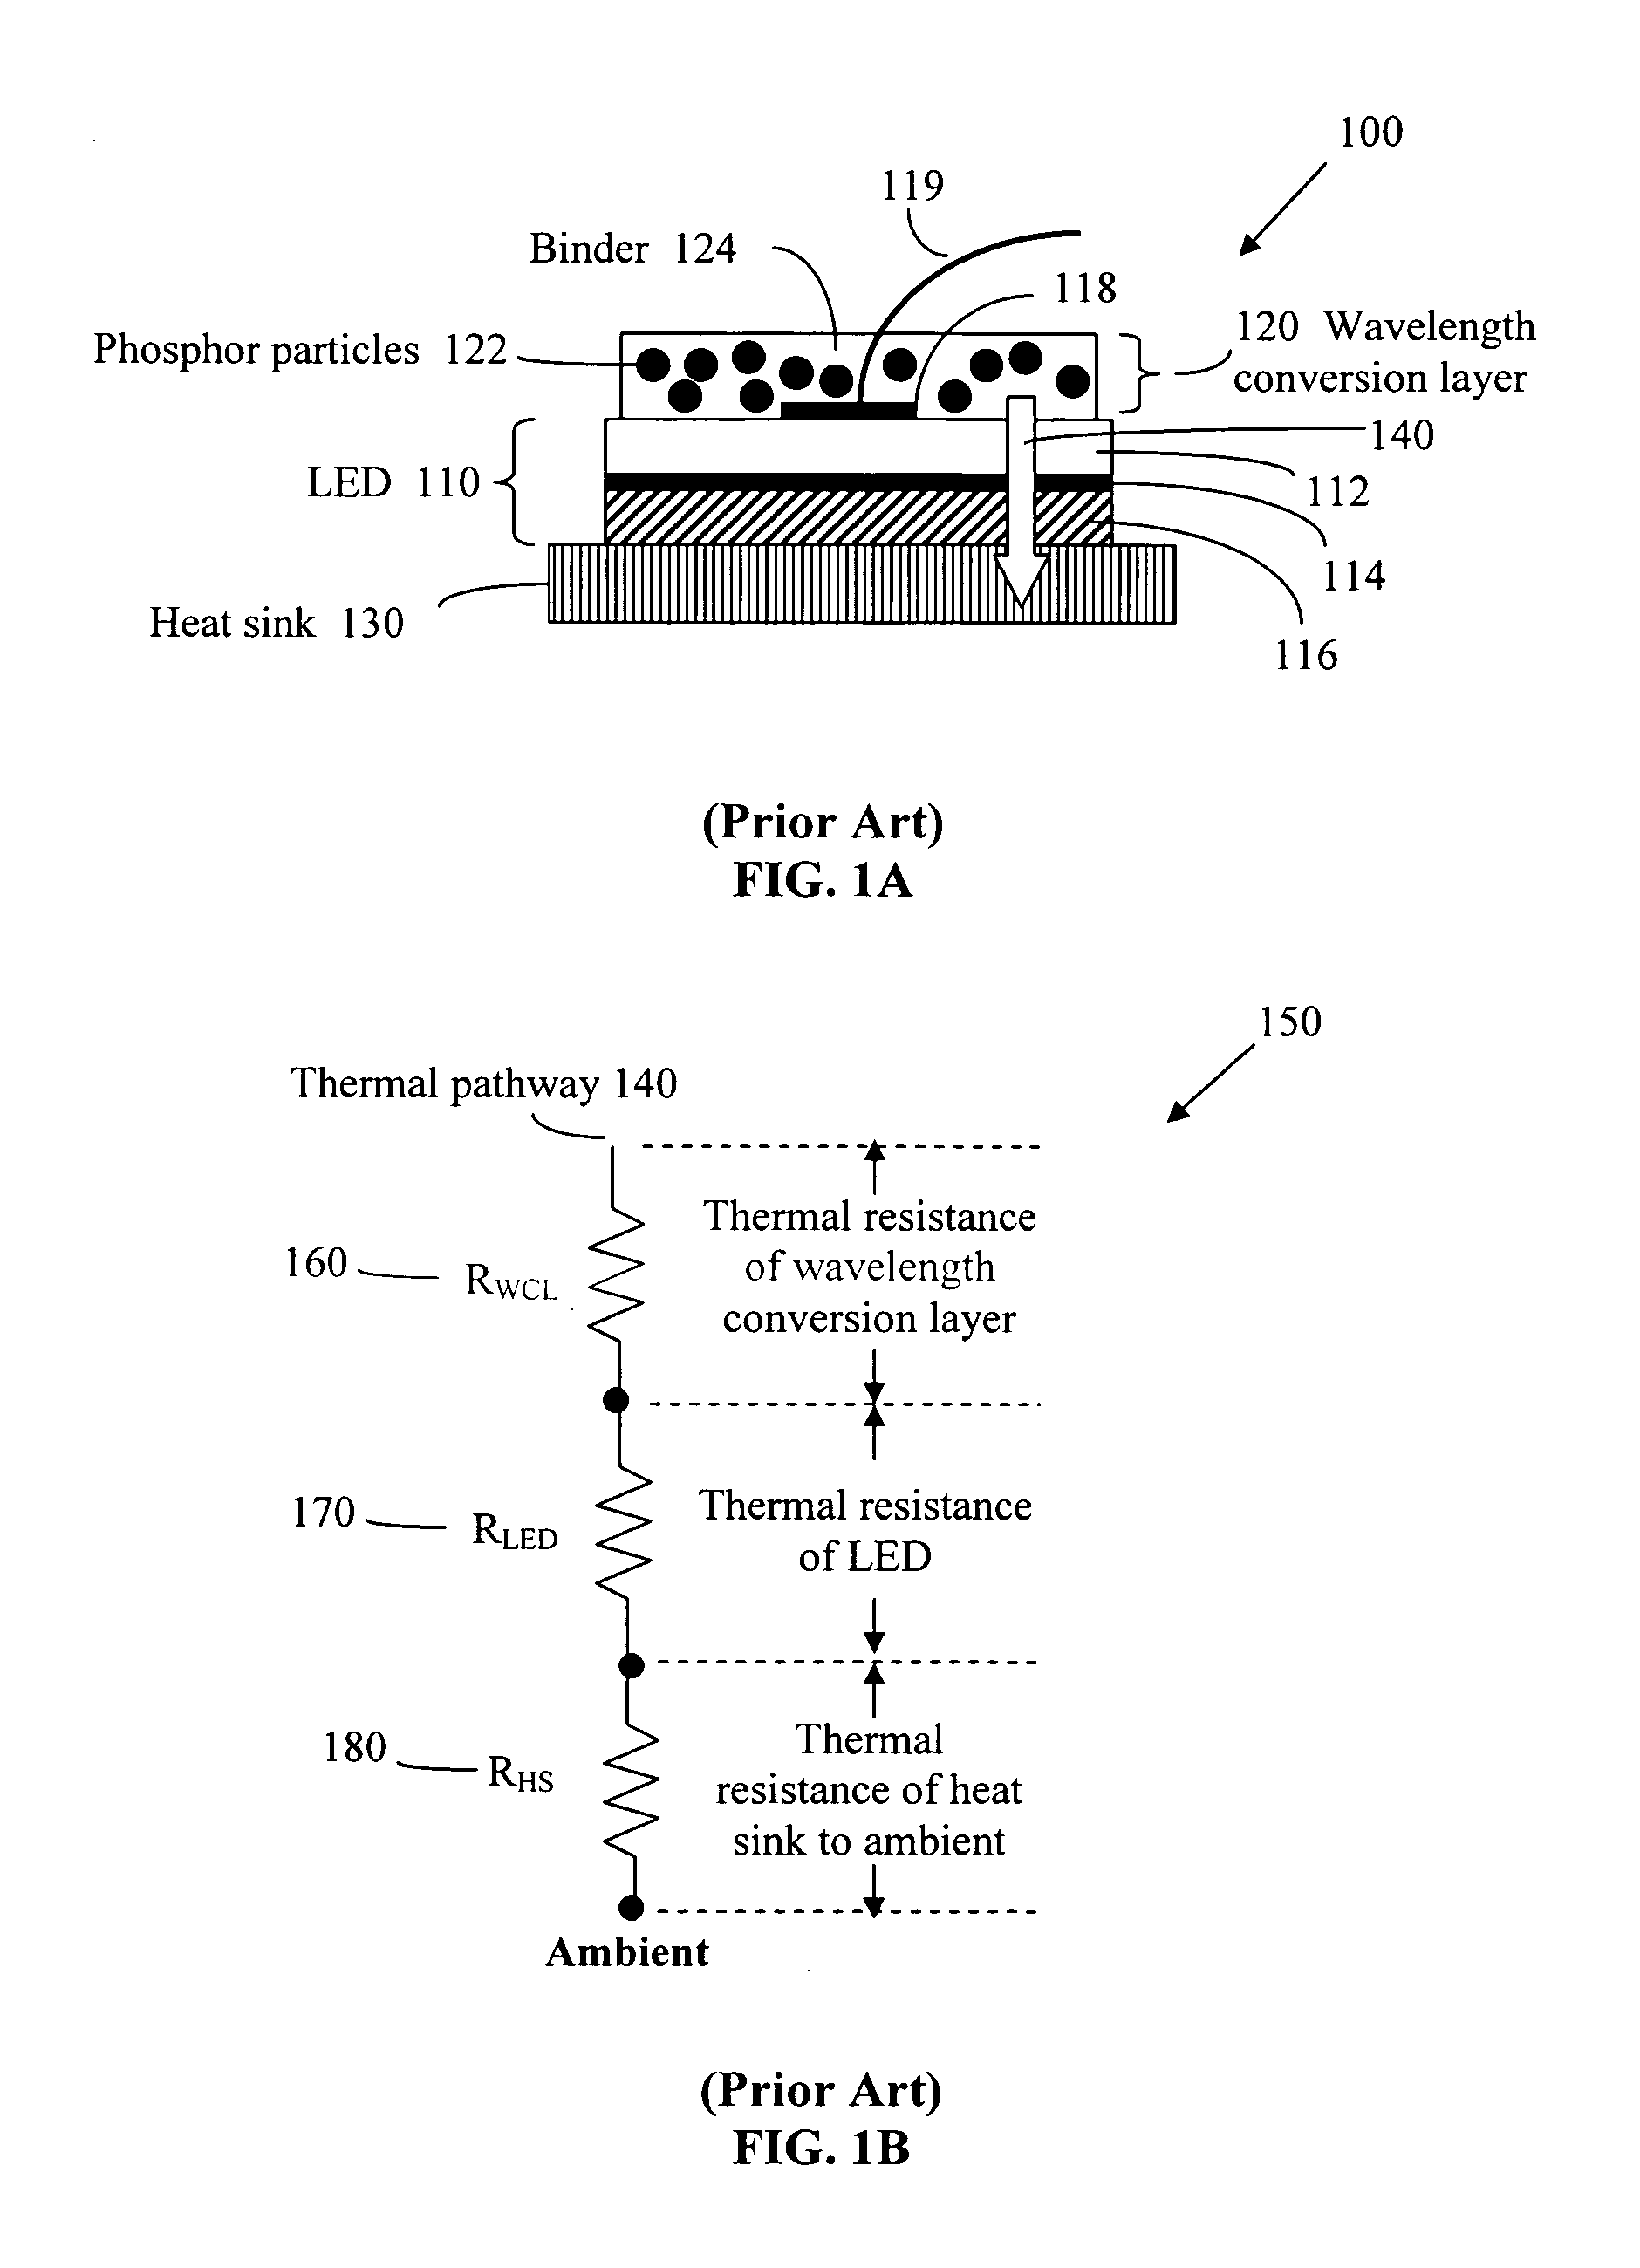 Compact light conversion device and light source with high thermal conductivity wavelength conversion material